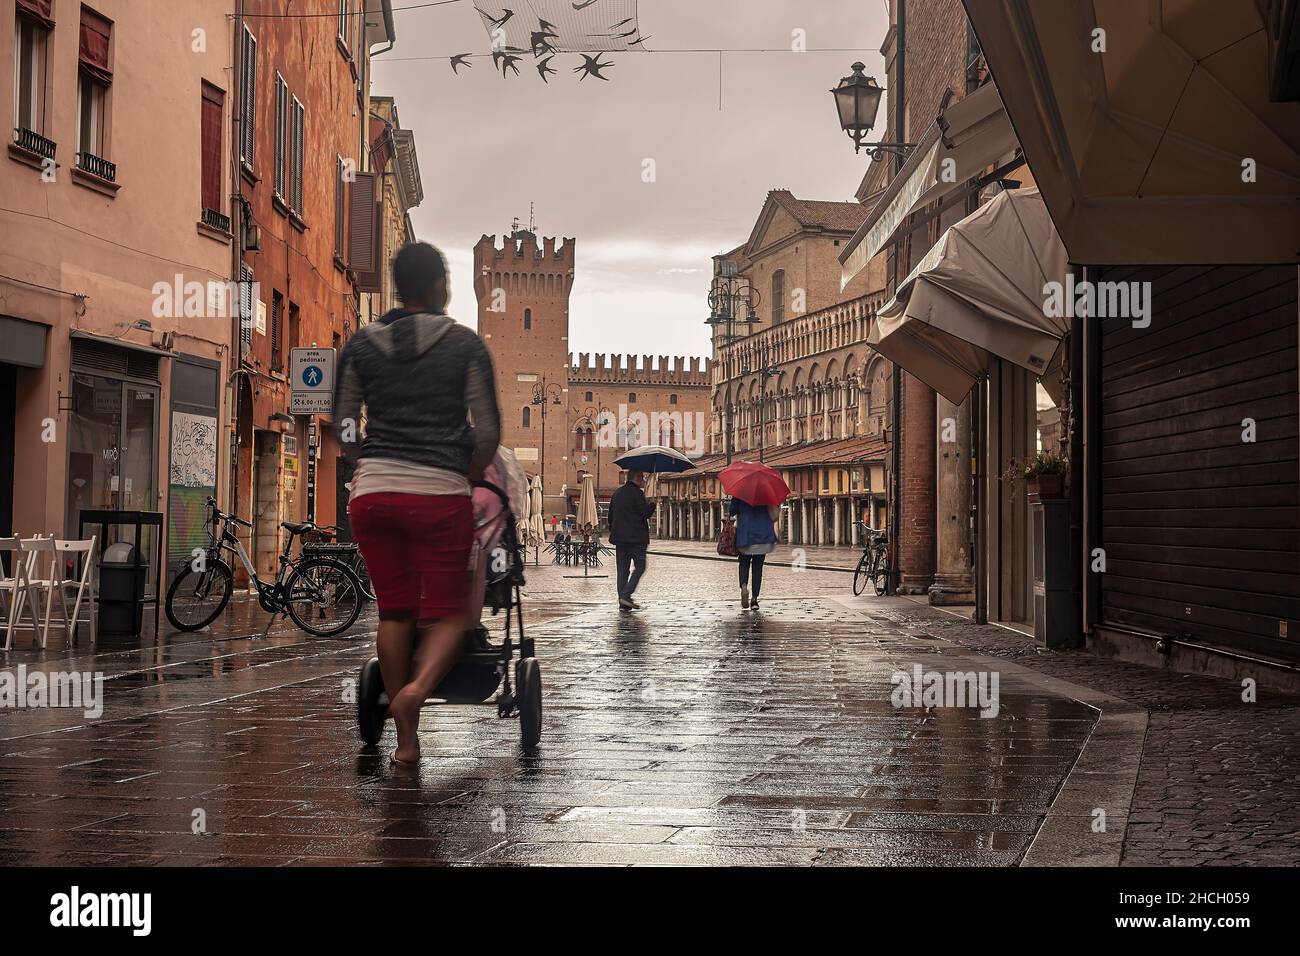 FERRARA, ITALY 29 JULY 2020 : Evocative view of the street that leads to Piazza Trento Trieste in Ferrara in Italy with people in their daily lives Stock Photo